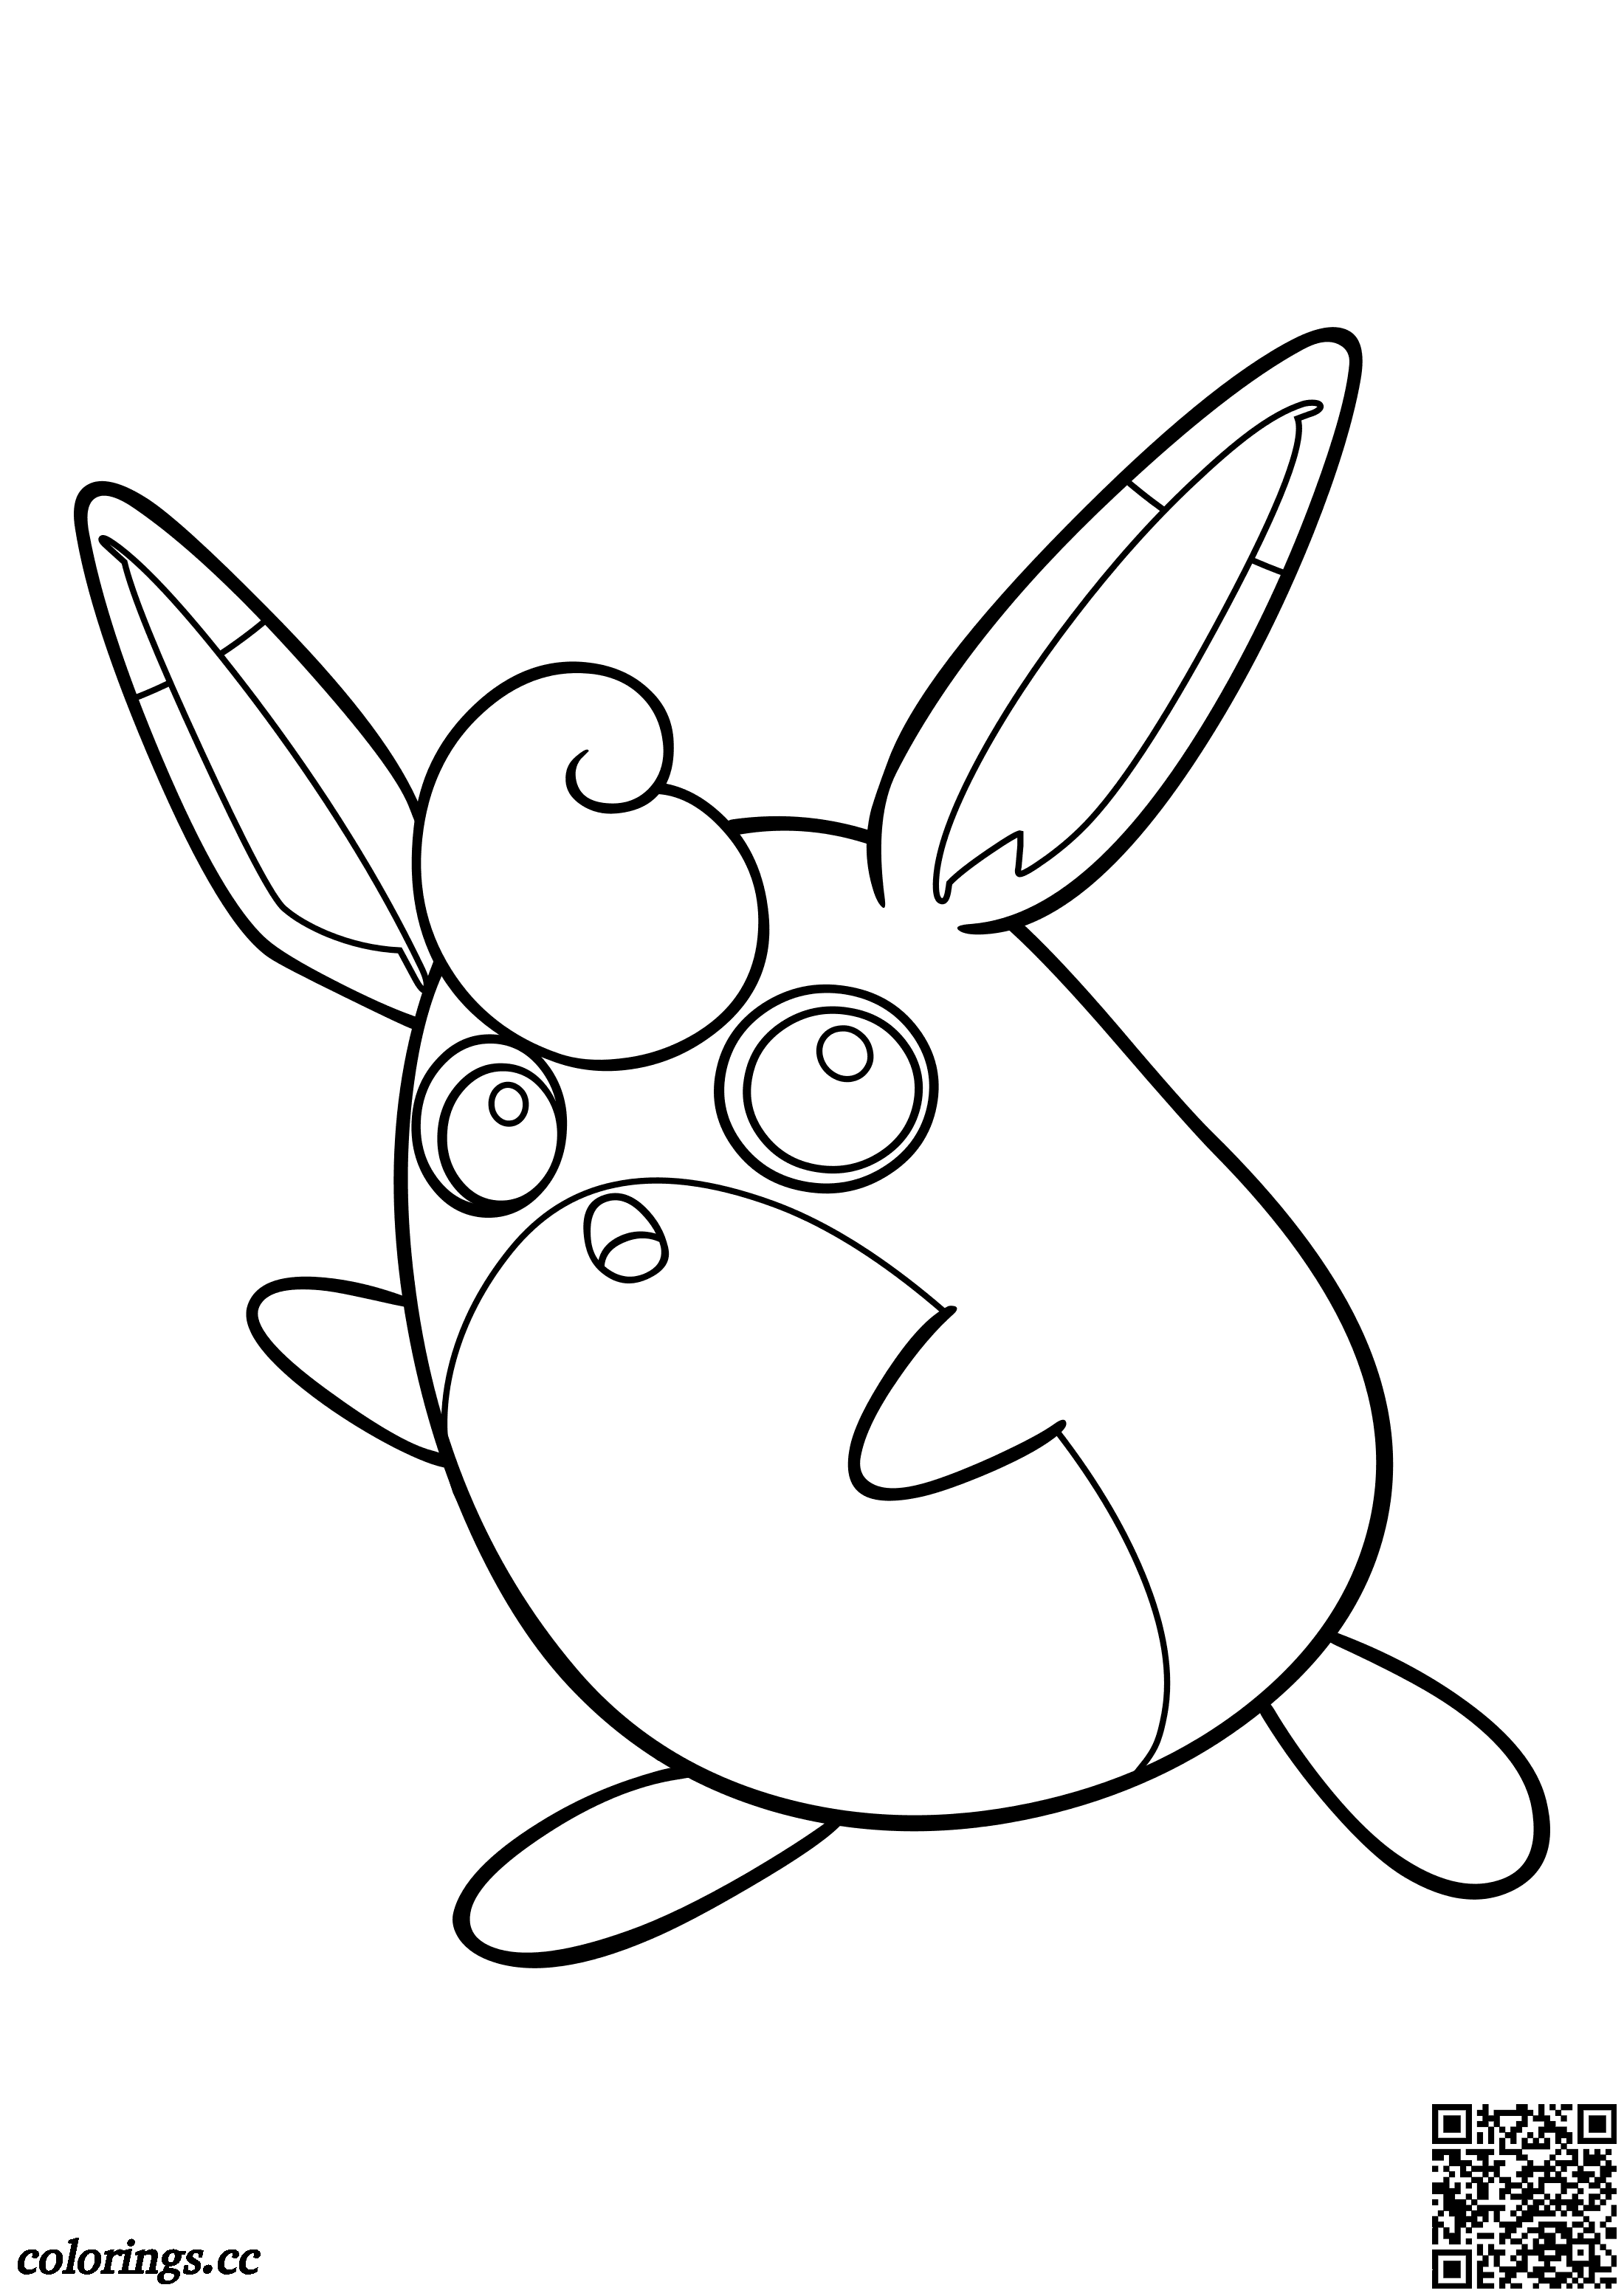 040 - Wigglytuff coloring pages, Pokemon coloring pages - Colorings.cc